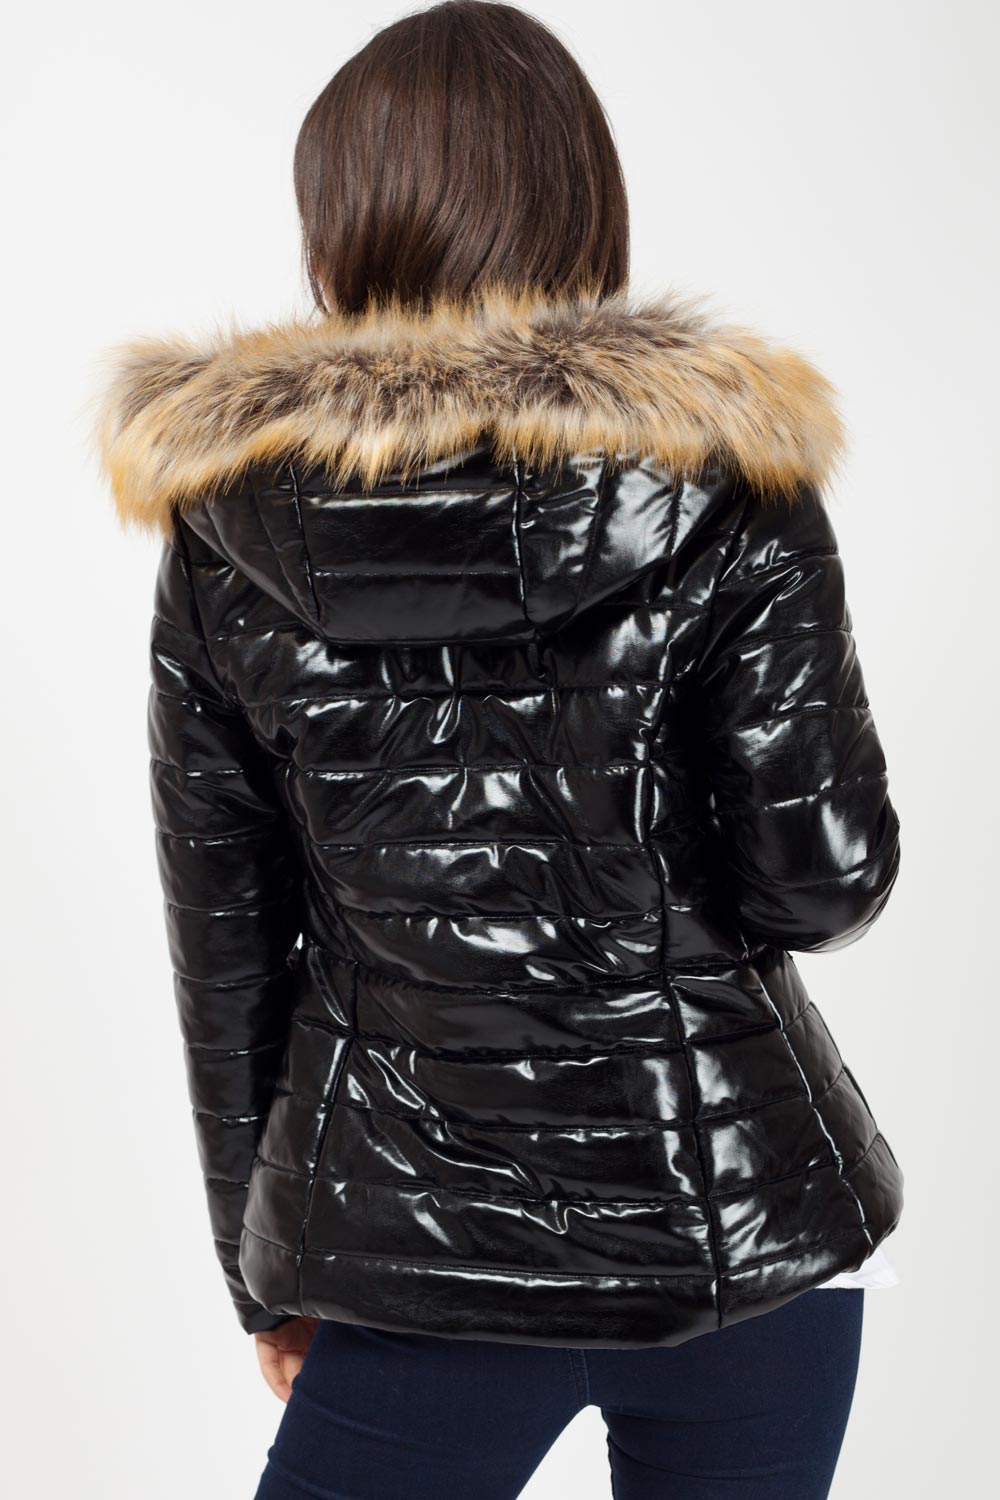 Featured image of post Black Puffer Jacket With Faux Fur Hood - Adidas originals padded jacket with 3 stripes in black.